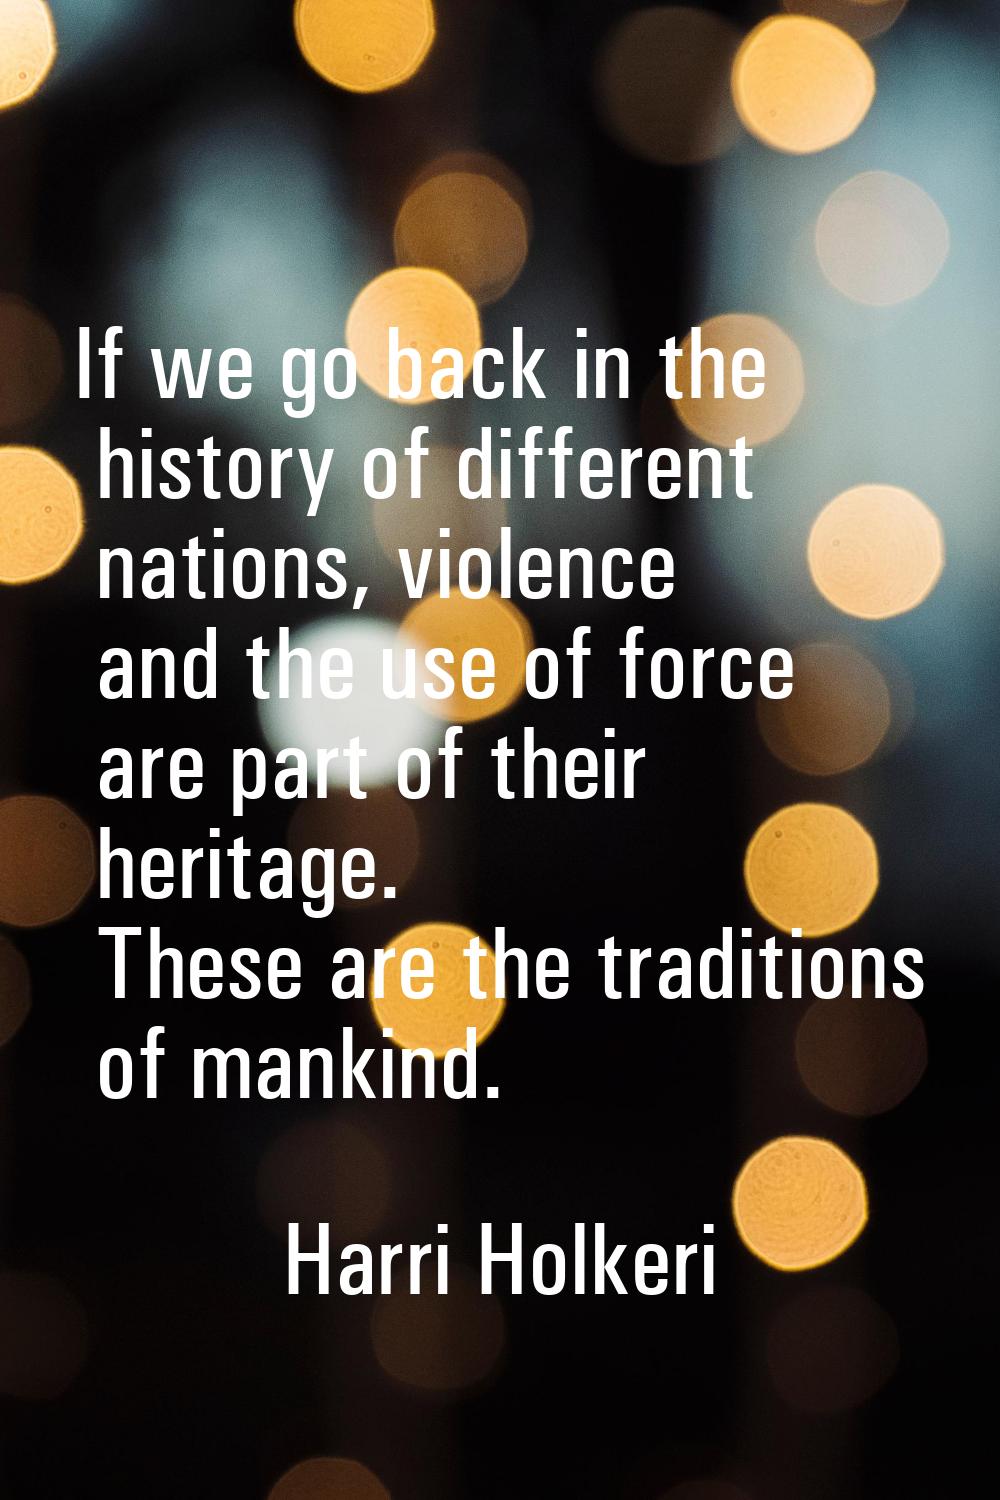 If we go back in the history of different nations, violence and the use of force are part of their 